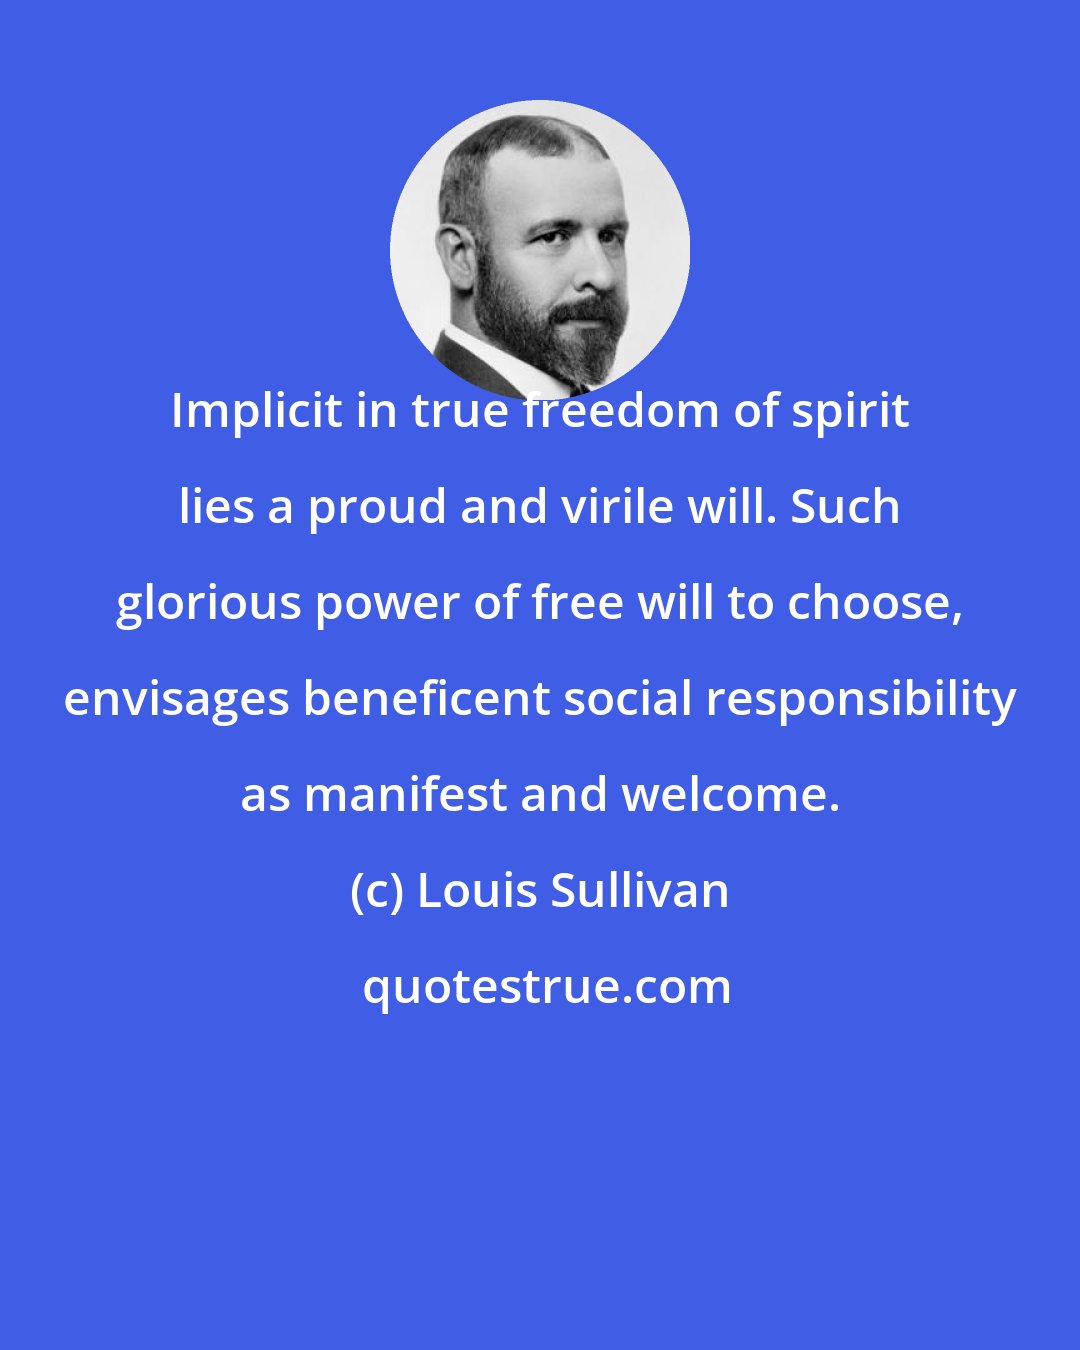 Louis Sullivan: Implicit in true freedom of spirit lies a proud and virile will. Such glorious power of free will to choose, envisages beneficent social responsibility as manifest and welcome.